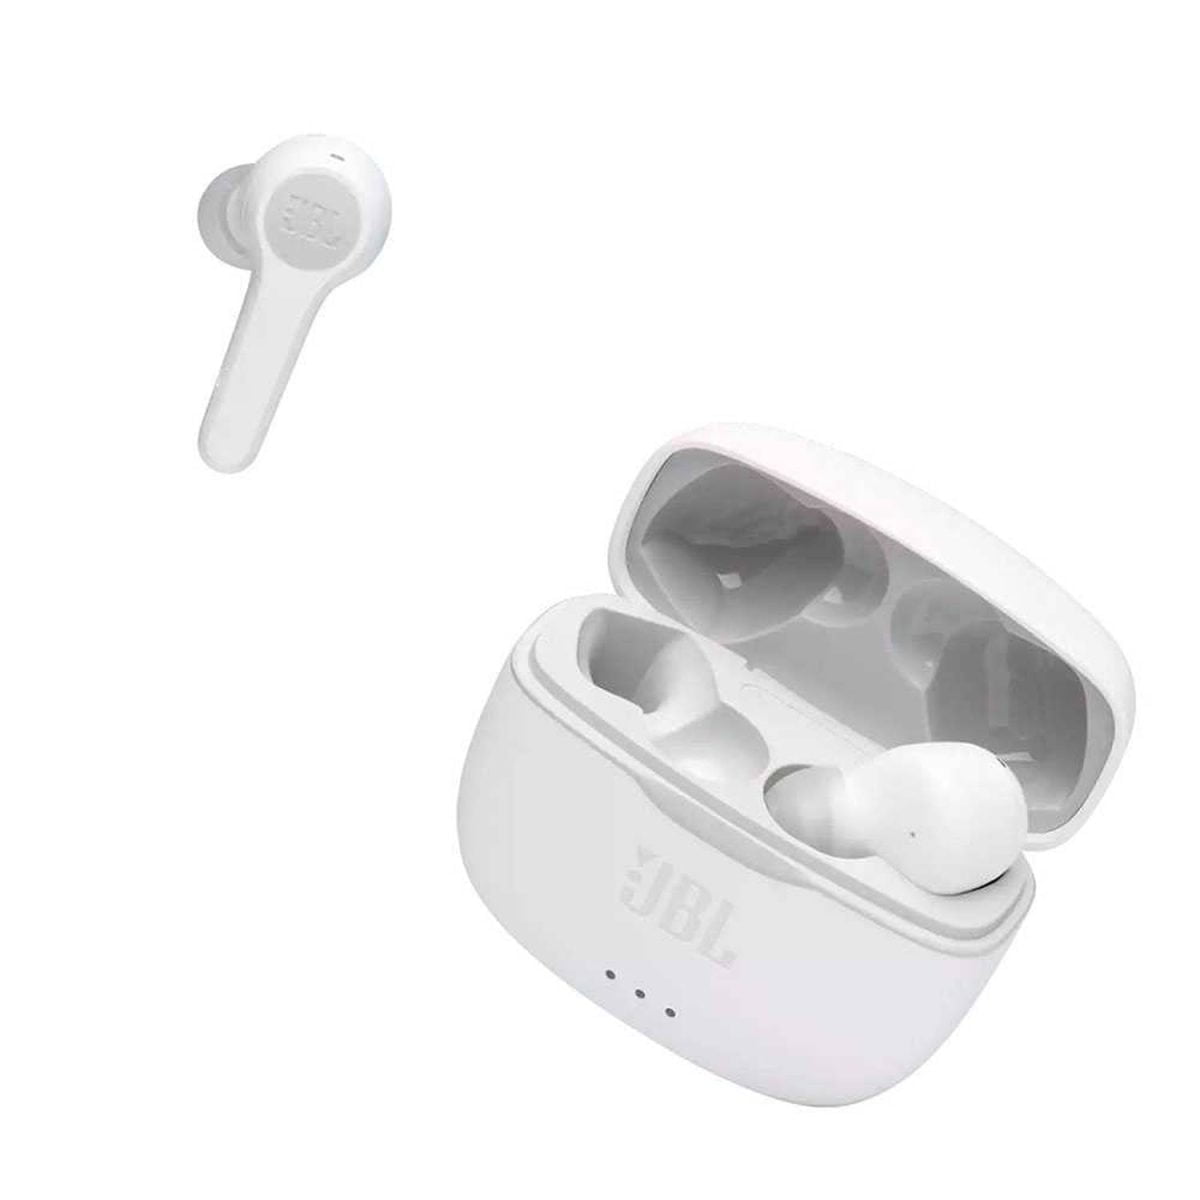 2102171212567 Smart Crop C0 5 0 5 1500X1500 70 Jbl &Lt;H1 Class=&Quot;Product_Title Entry-Title&Quot;&Gt;Jbl Tune 215 Tws Earbuds - White&Lt;/H1&Gt; &Lt;Ul&Gt; &Lt;Li&Gt;Dual Connect Gives You The Freedom To Listen To Music Or Attend To Calls With Either One Or Both Earbuds&Lt;/Li&Gt; &Lt;Li&Gt;Offers Up To 5 Hours Of Battery Life And Up To 20 Hours More When Using The Charging Case&Lt;/Li&Gt; &Lt;Li&Gt;Quickly Recharge Via The Usb-C Interface&Lt;/Li&Gt; &Lt;Li&Gt;Charging Case Features A River Stone-Inspired Design, With A Soft Body And A Curved Lid That Pops Out To Give You Quick Access To The Buds&Lt;/Li&Gt; &Lt;/Ul&Gt; Jbl Earphones Jbl Tune 215 Tws Earbuds - White